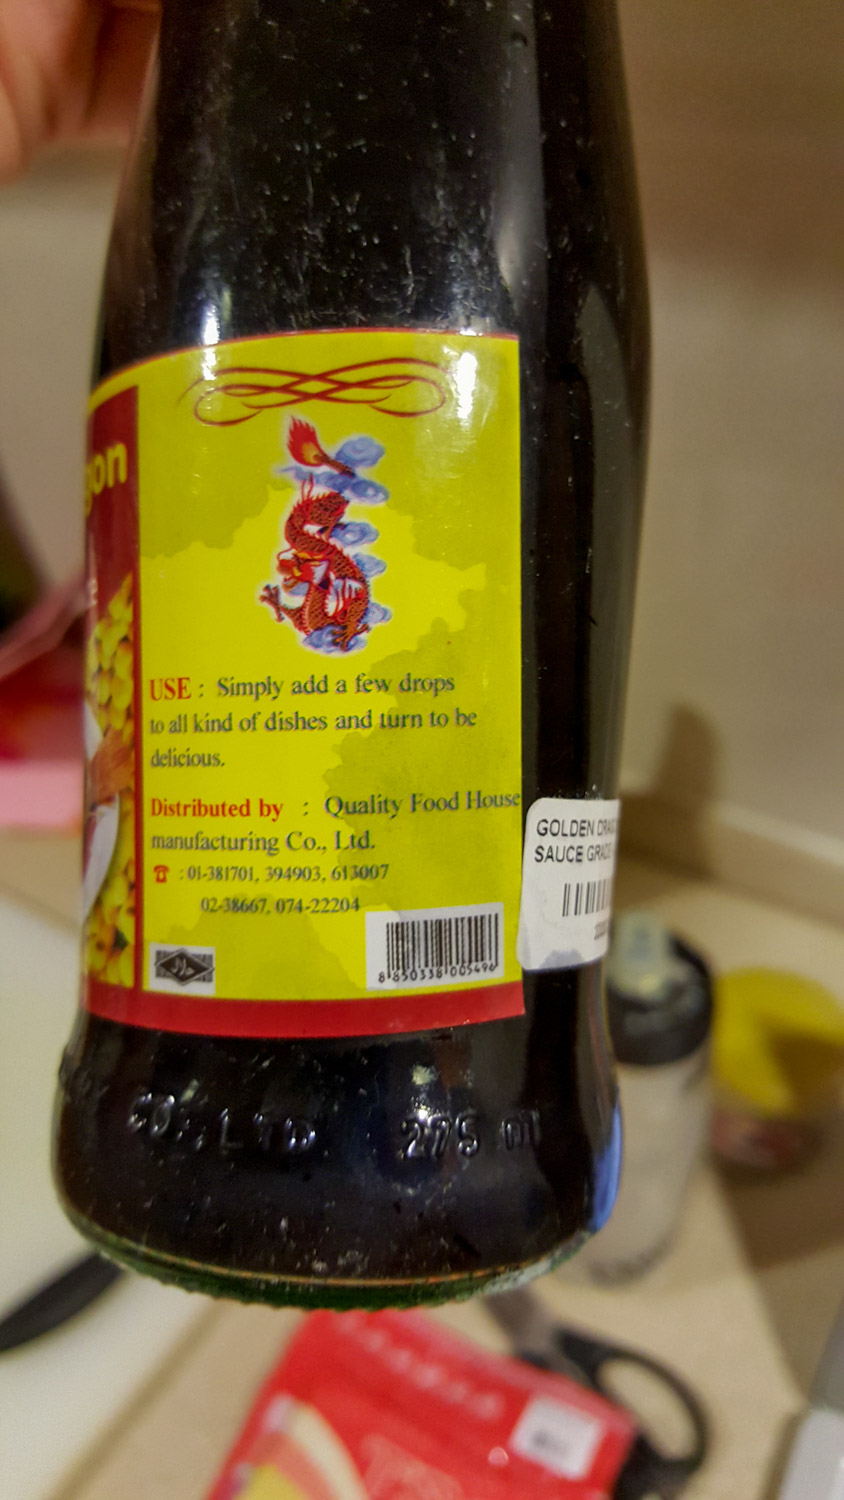 This is the soy sauce we didn't use in last night's cooking.